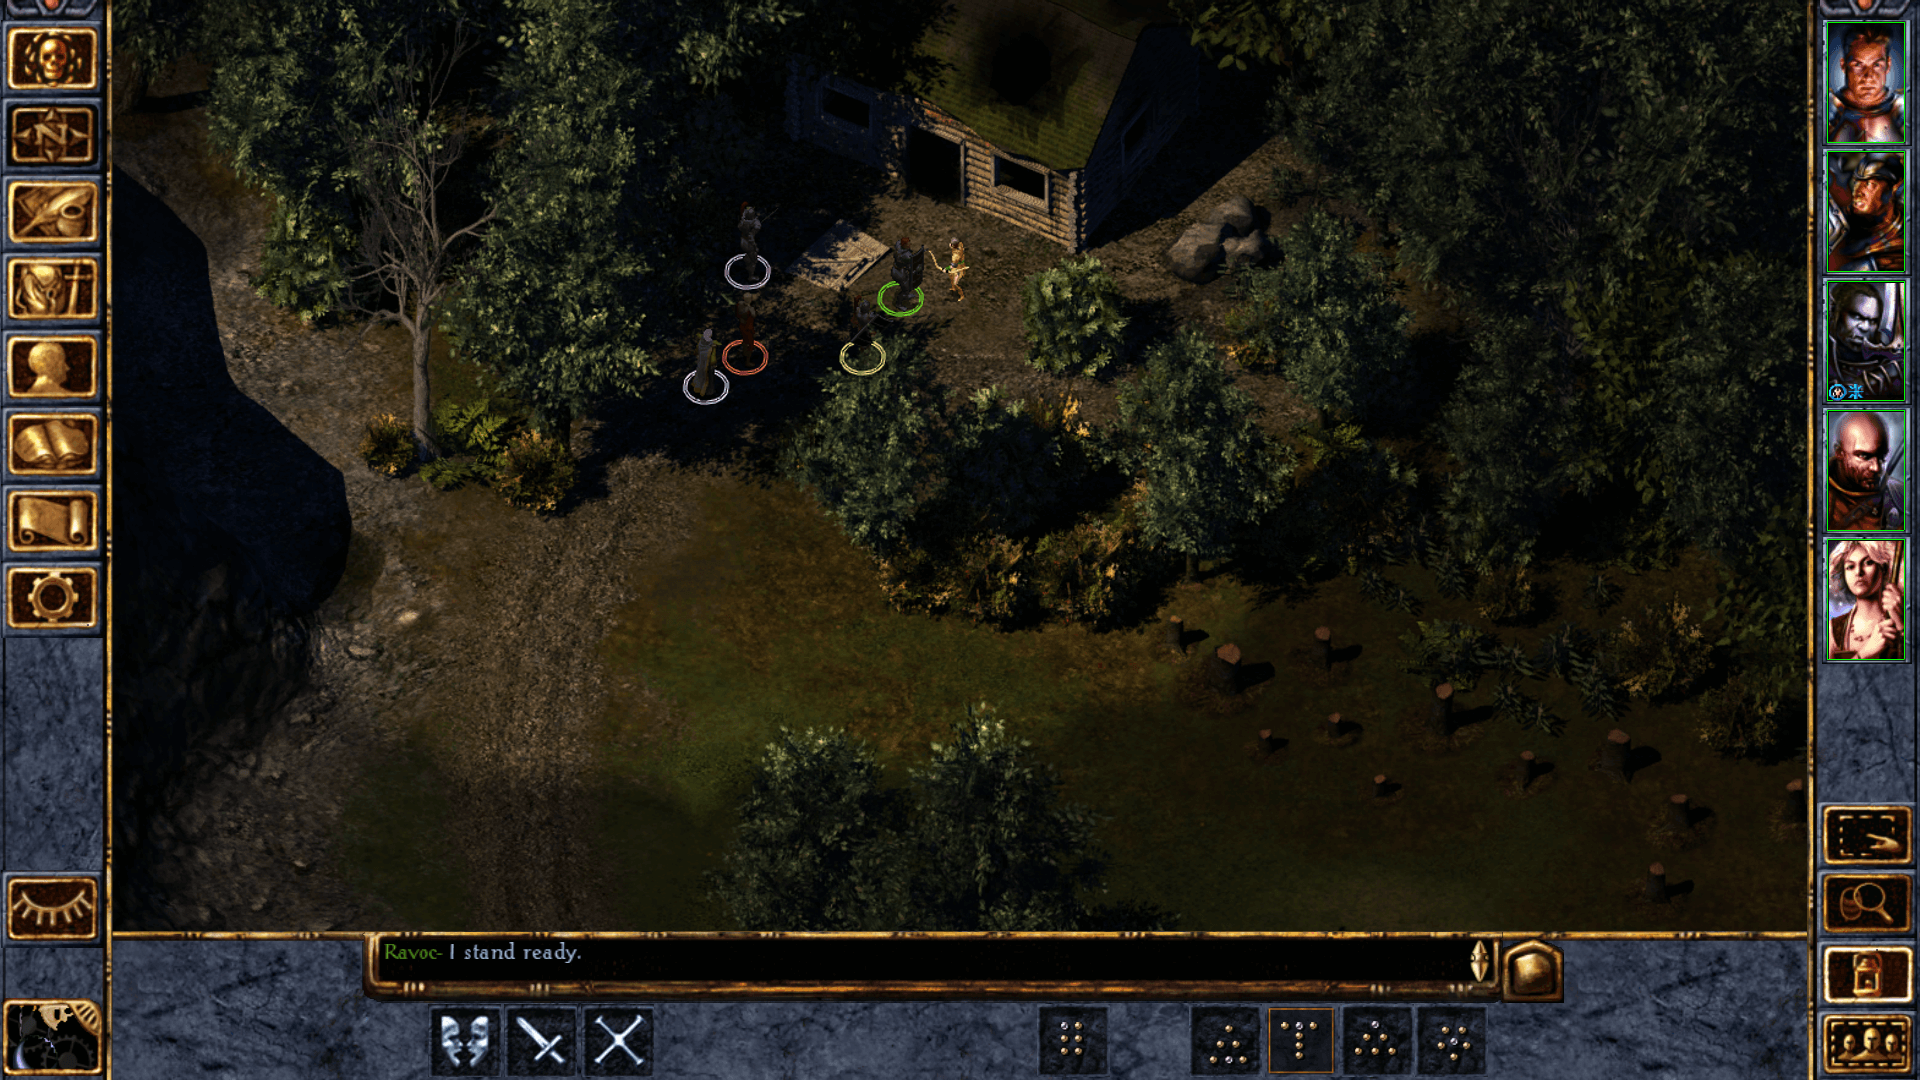 download the new for android Baldur’s Gate III